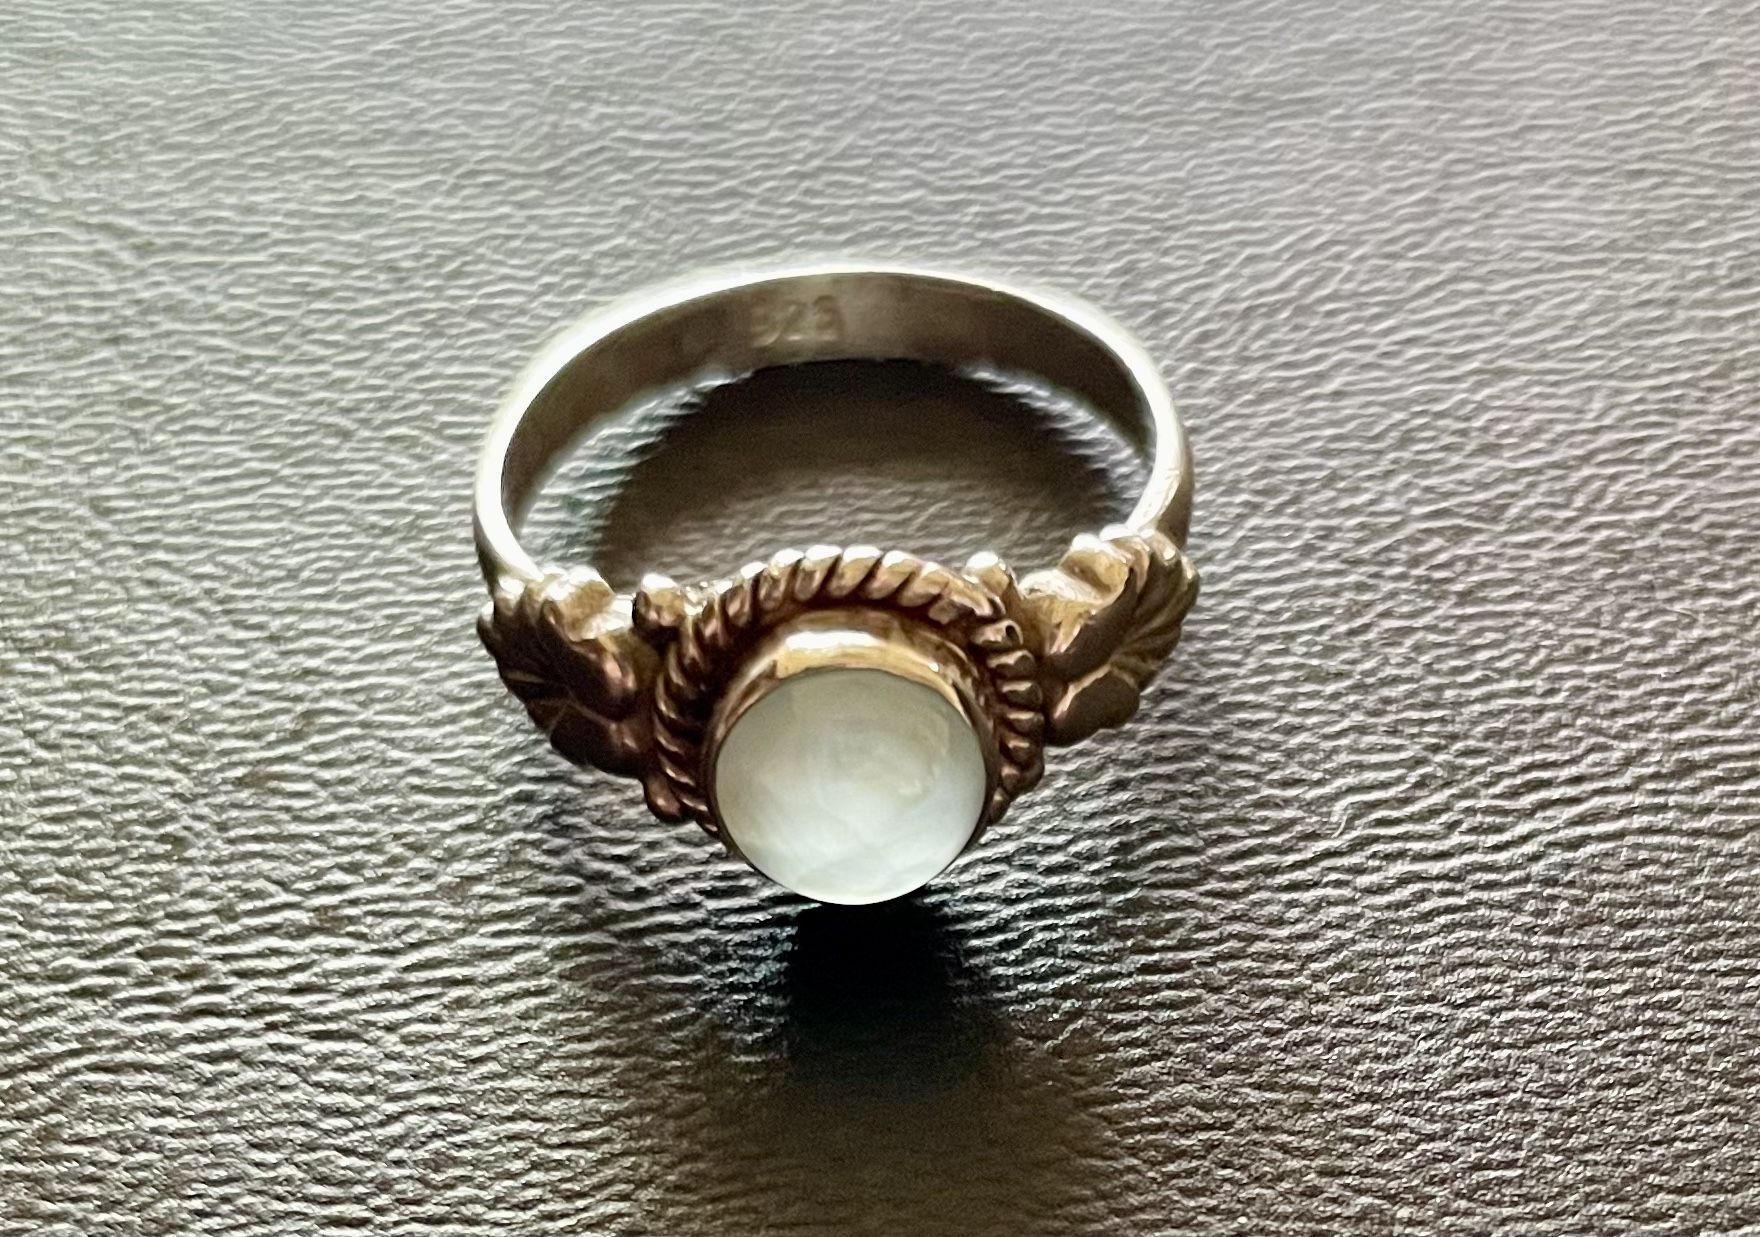 Moonstone And Sterling Silver Ring. Size 8